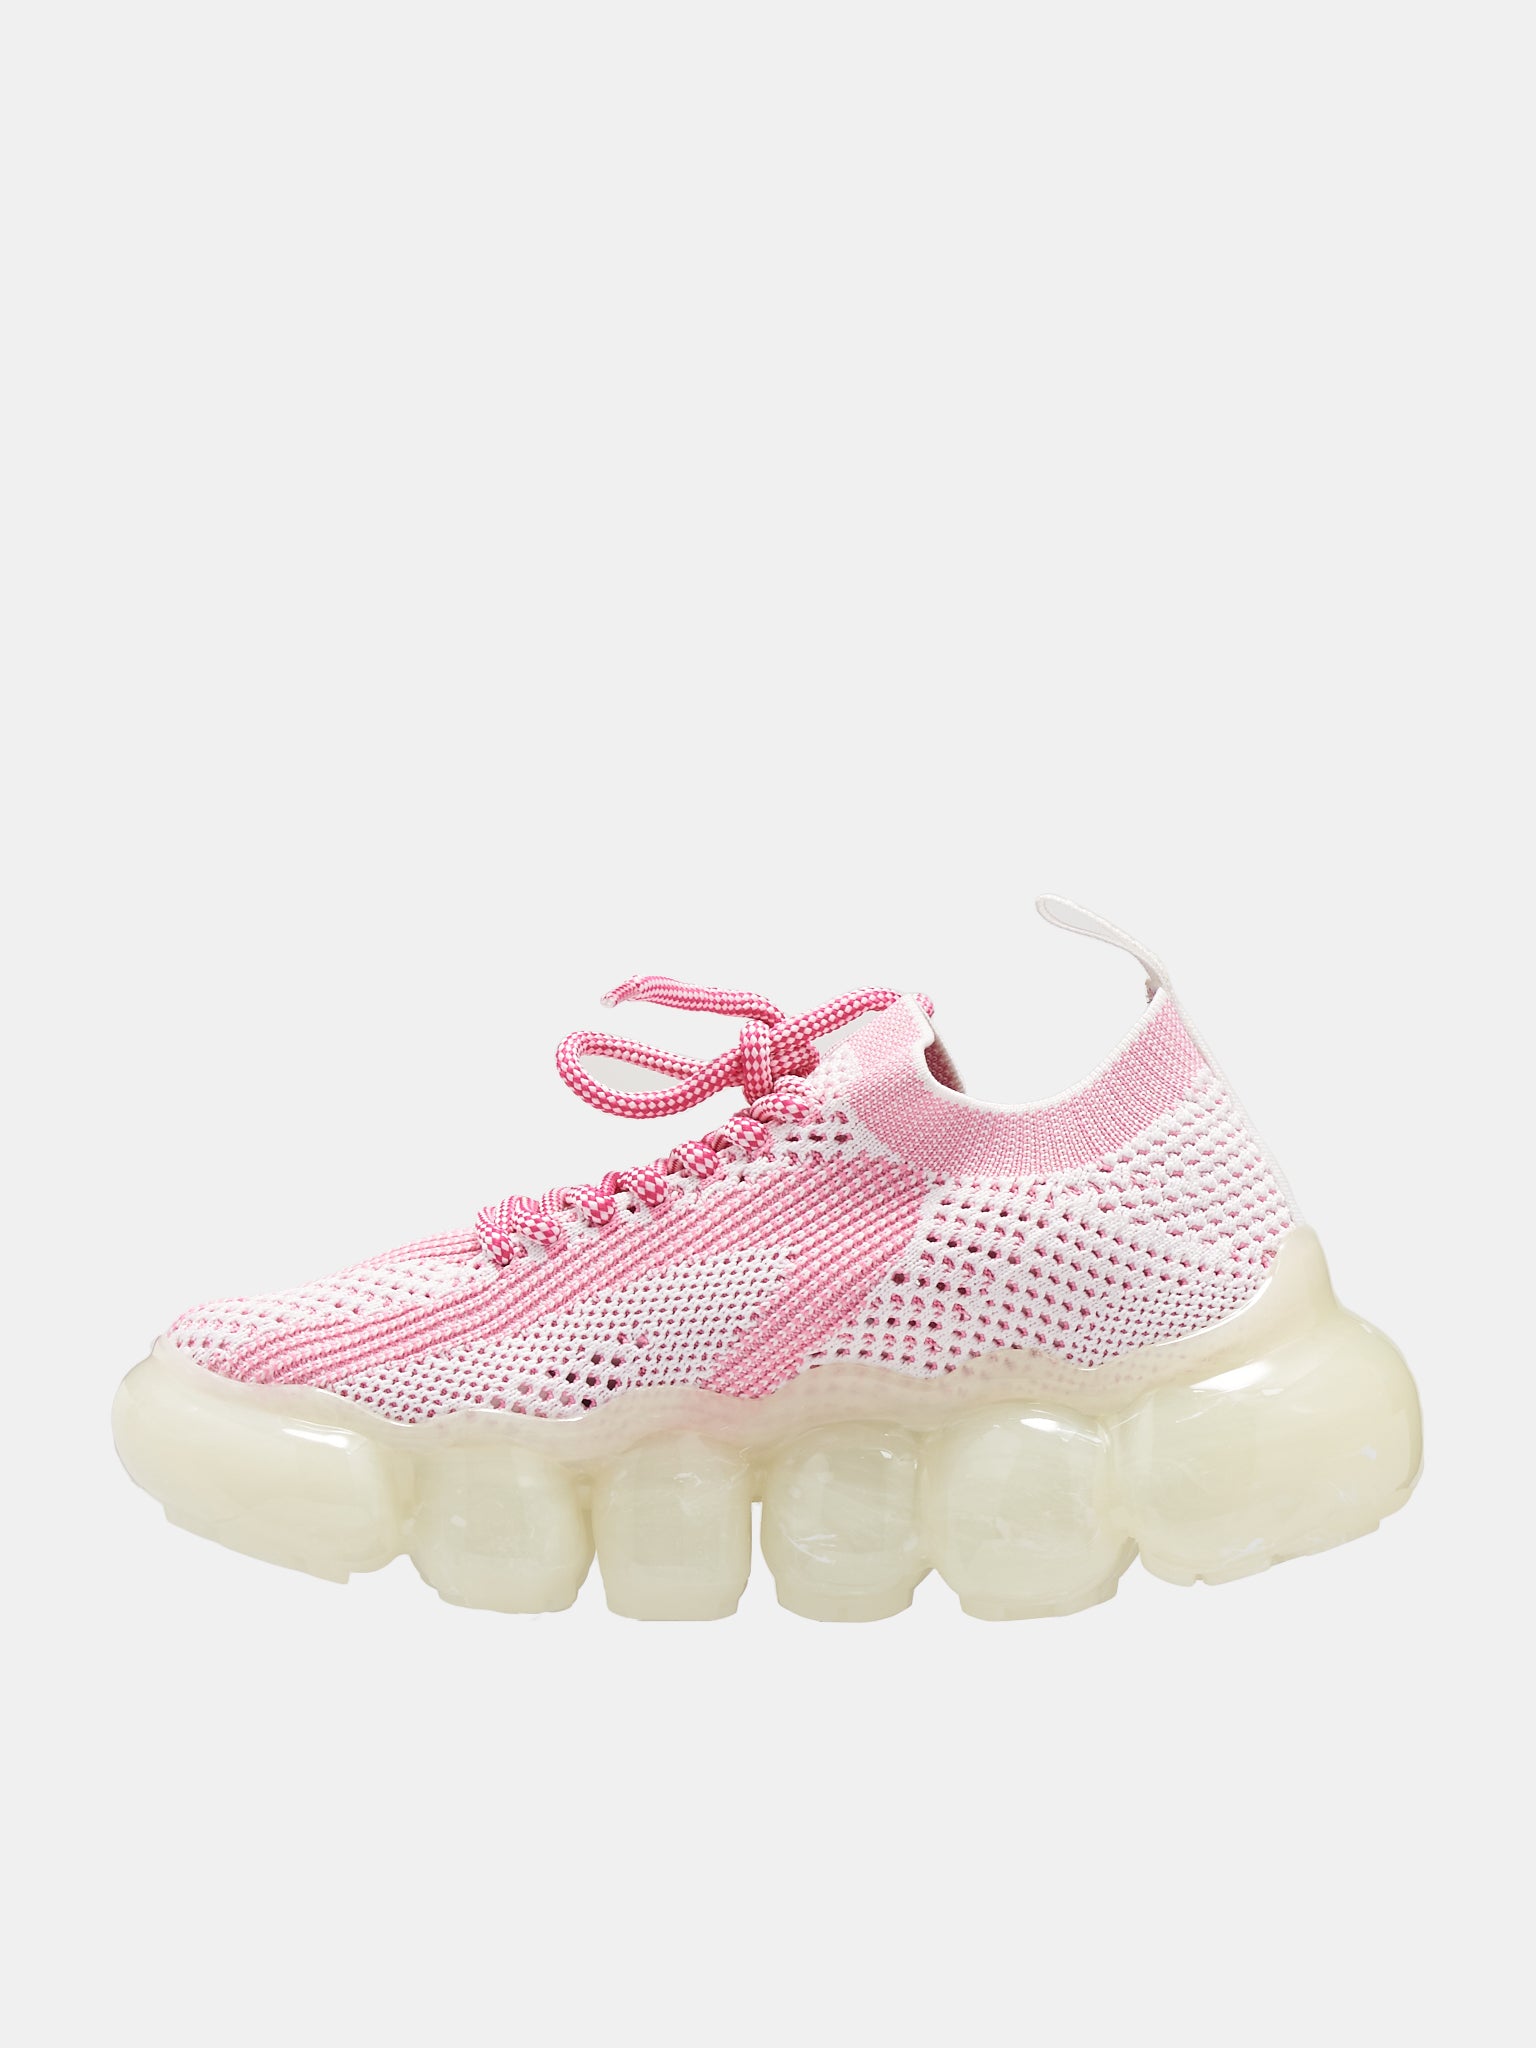 Jewelry Recycle Sneakers (595-WHITE-PINK)